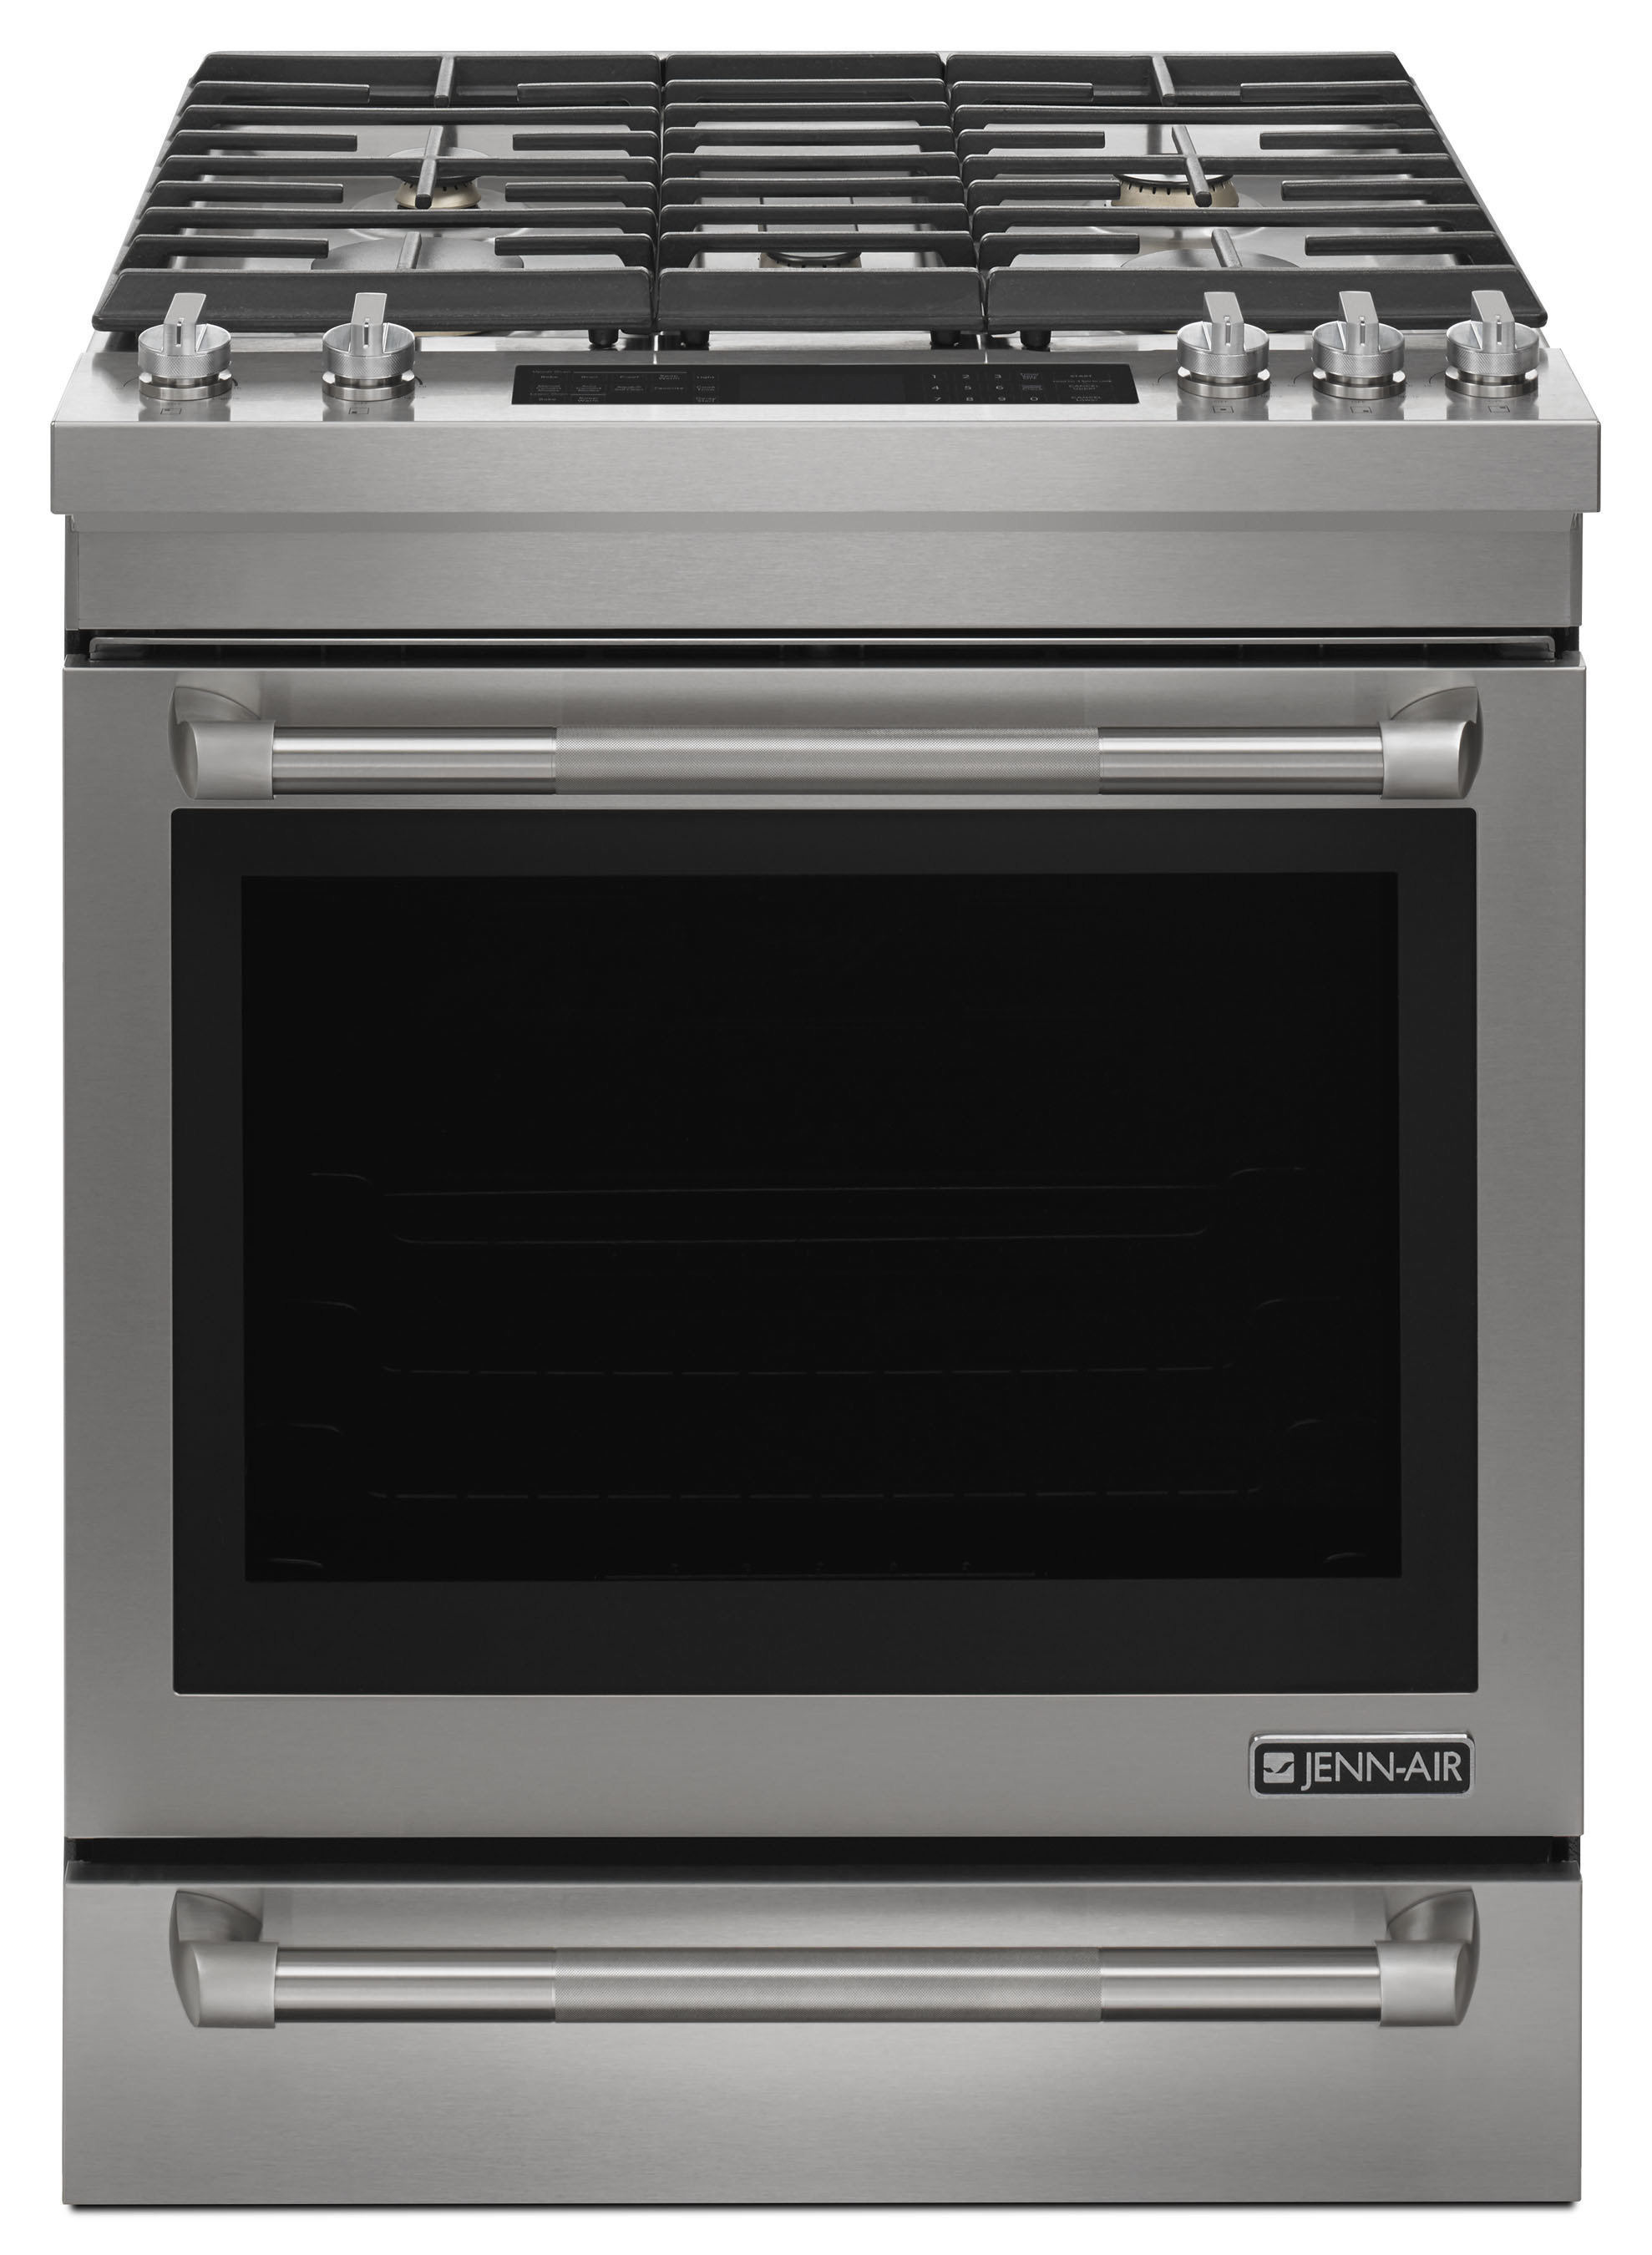 Jenn-Air brand's new collection of 30-inch ranges are offered in dual-fuel, gas, induction and radiant options.